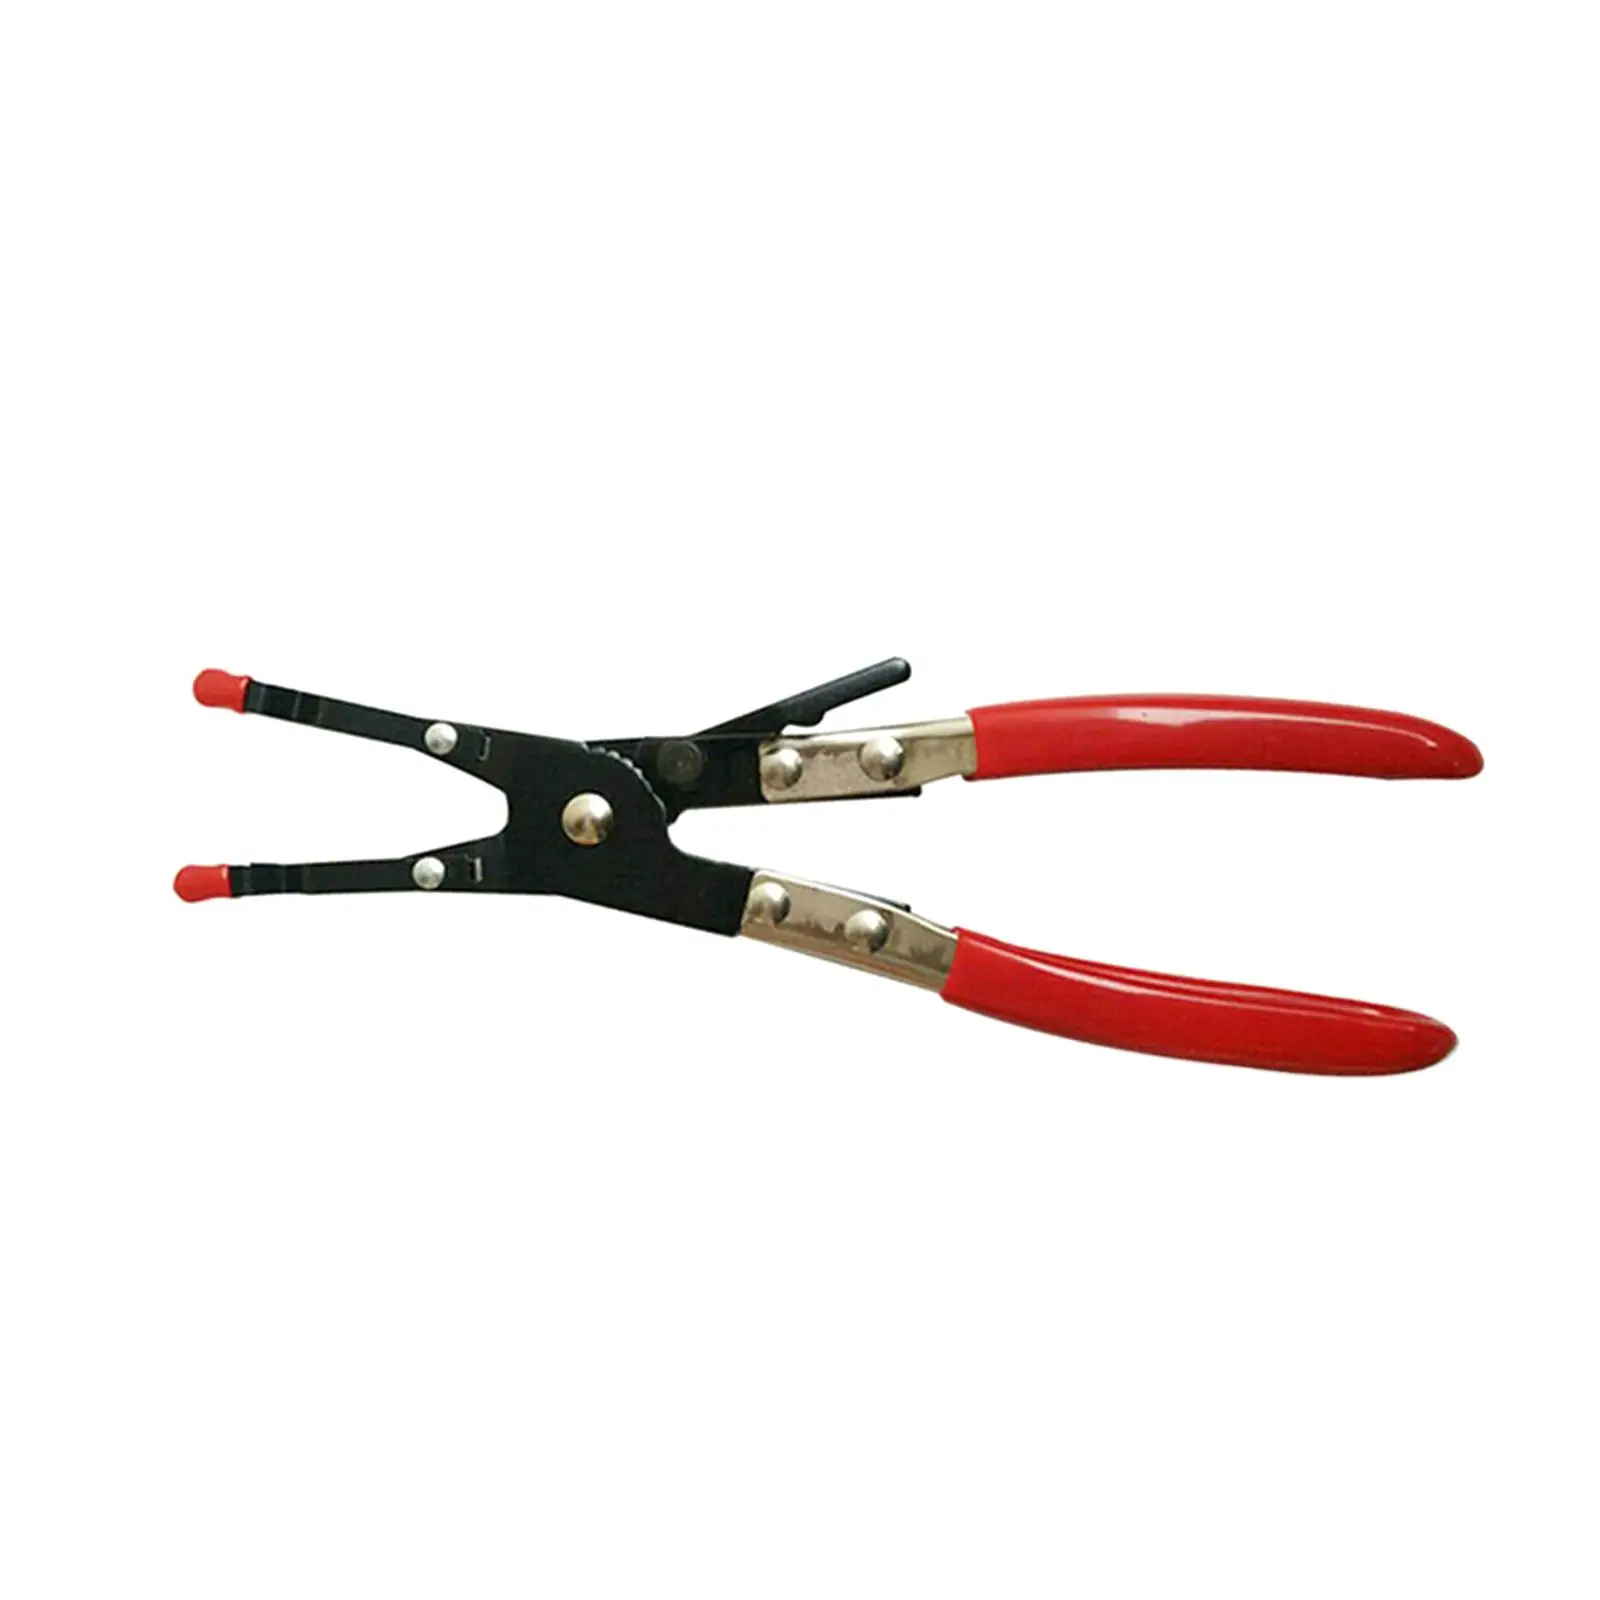 

Hold 2 Wires Soldering Plier Repair Kit Easy to Use Universal Wire Crimping Tool Kit Durable Welding Pliers for Vehicle Car